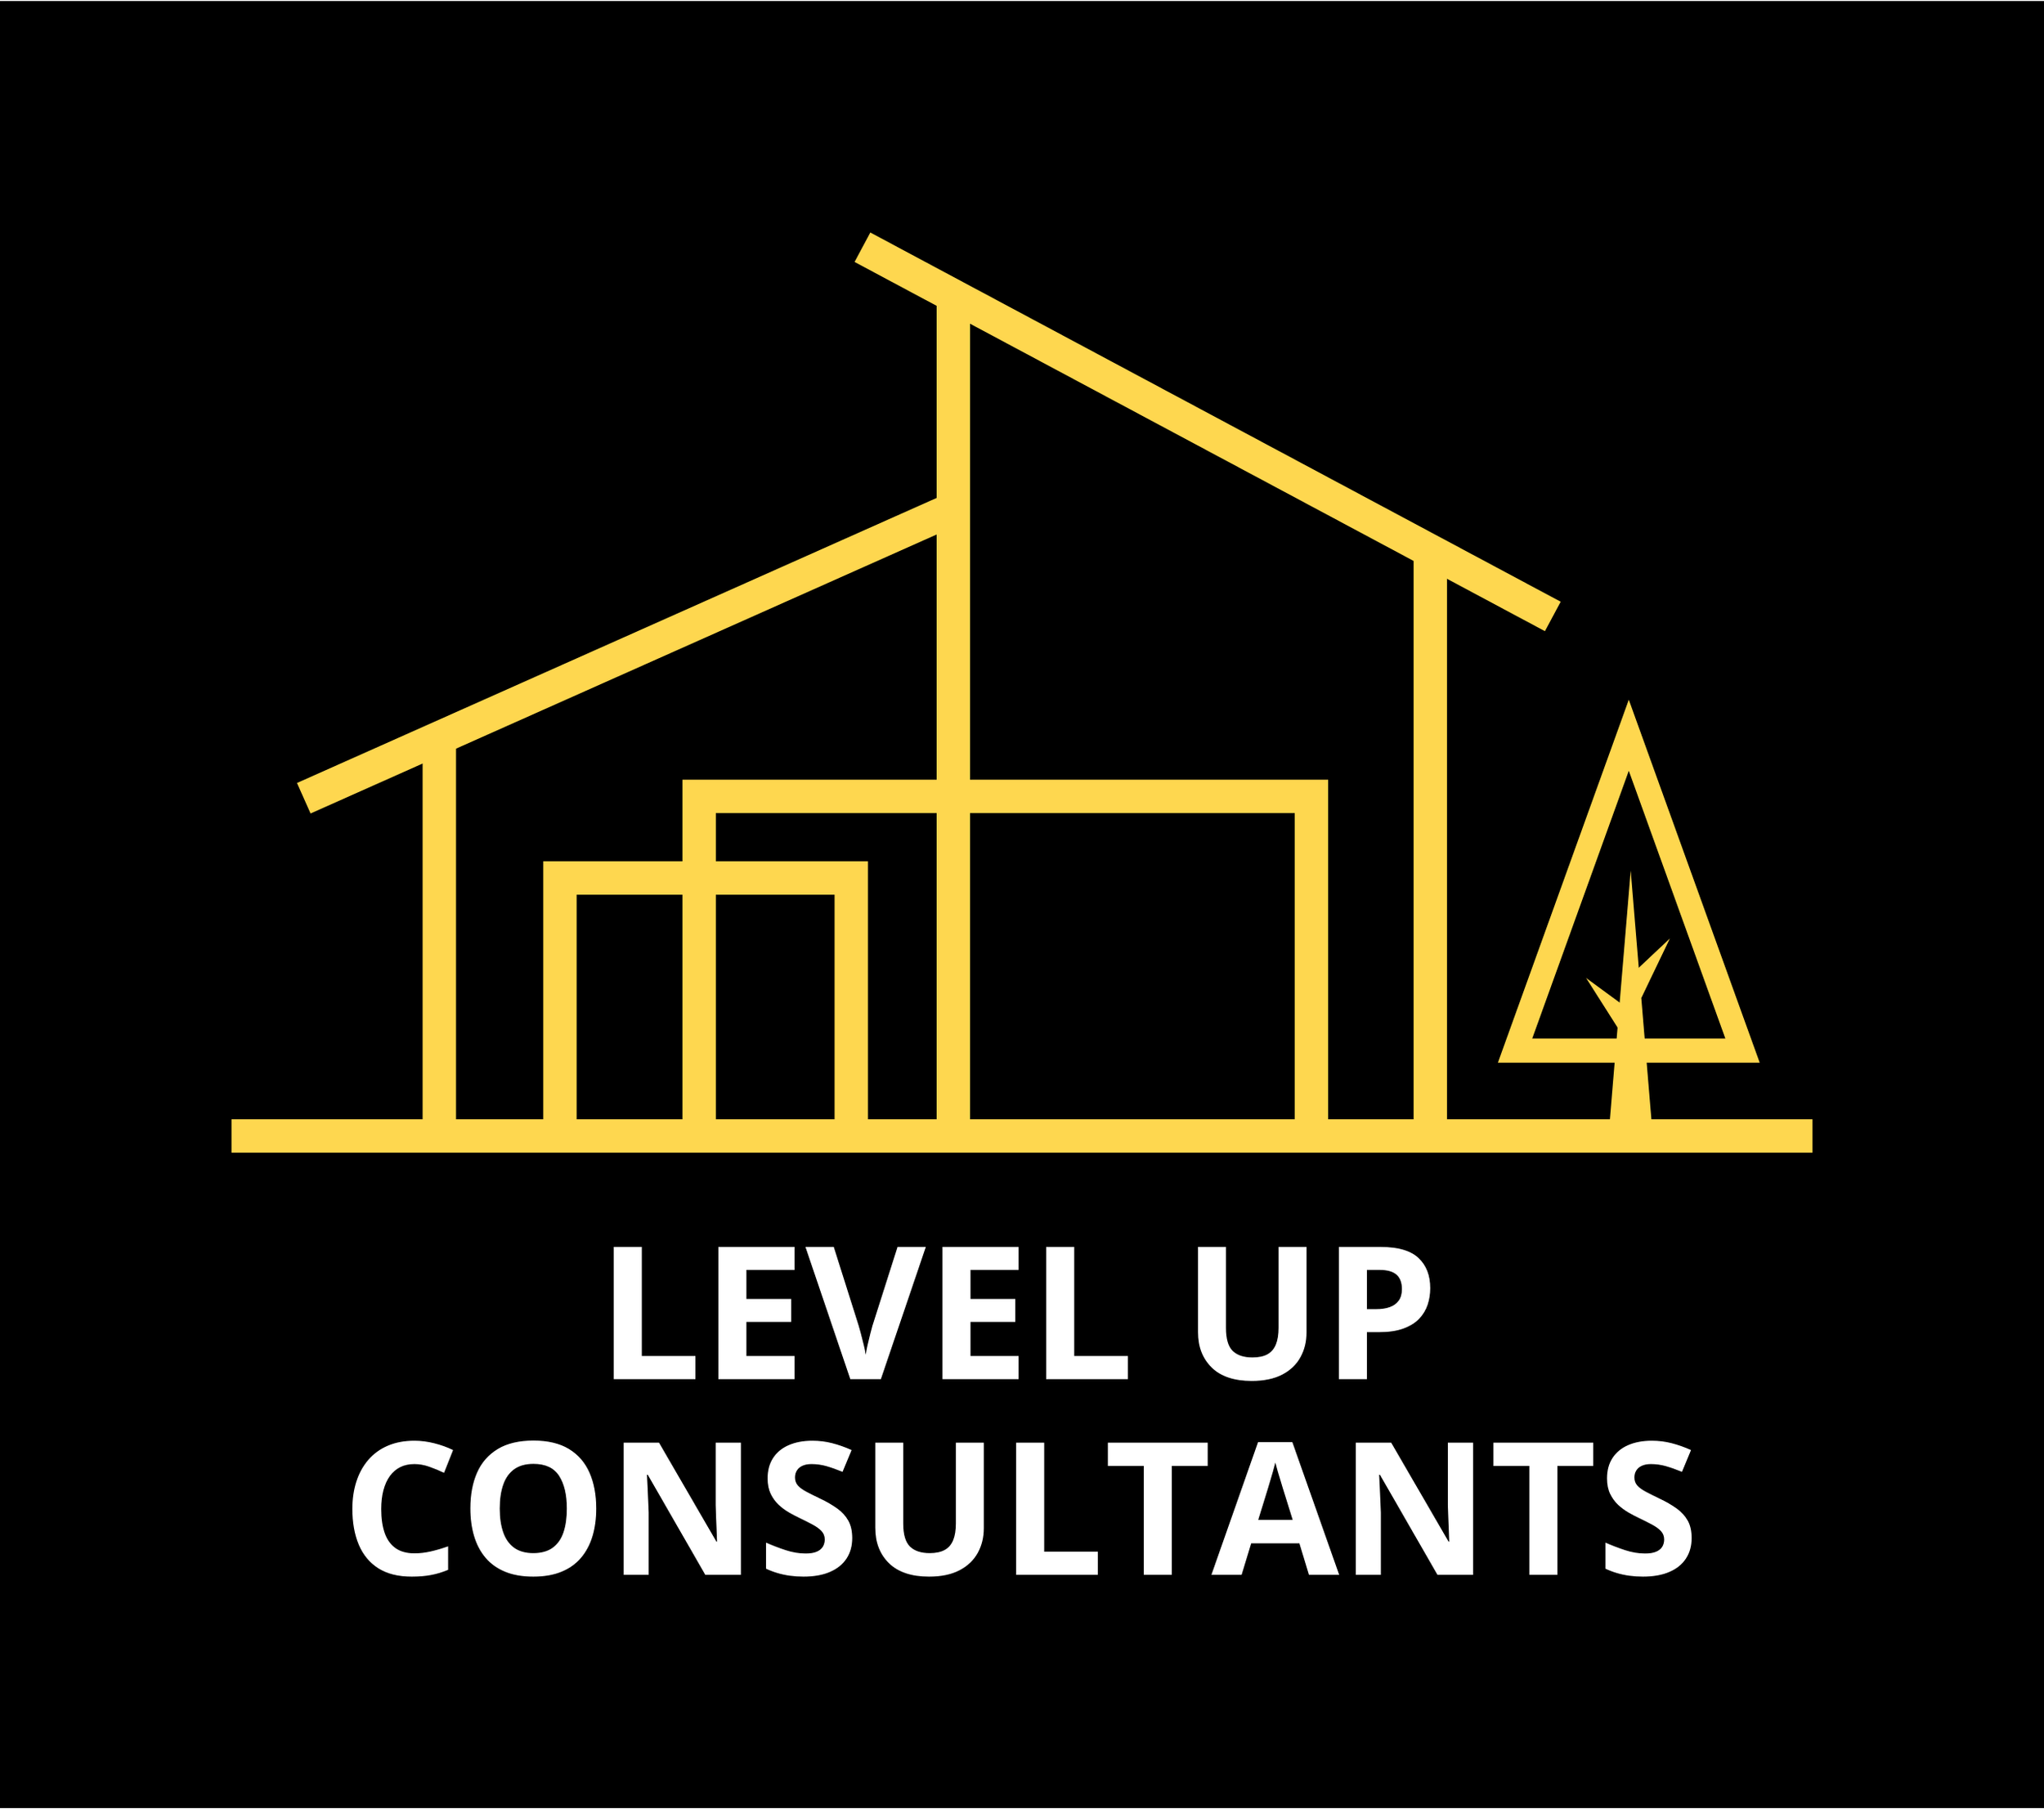 Level Up Consultants